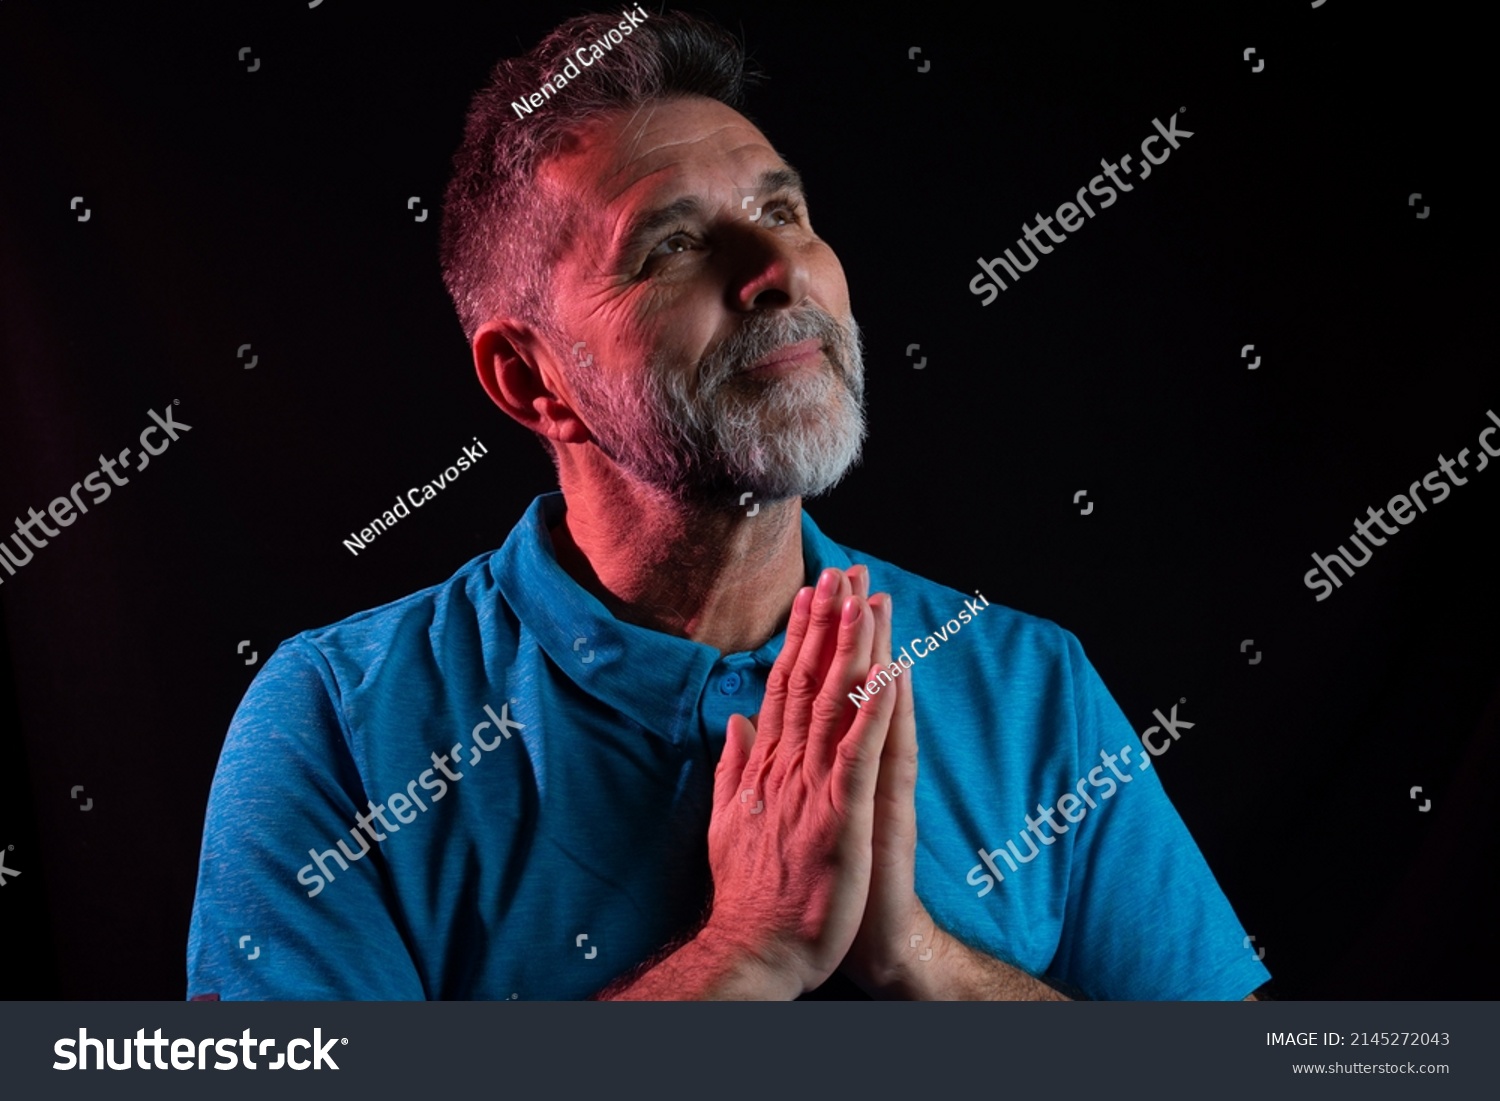 Closeup portrait mature man praying hands clasped hoping for best asking for forgiveness or miracle. Christian faith towards God concept. Concept for religion, faith, prayer and spirituality. Black.  #2145272043